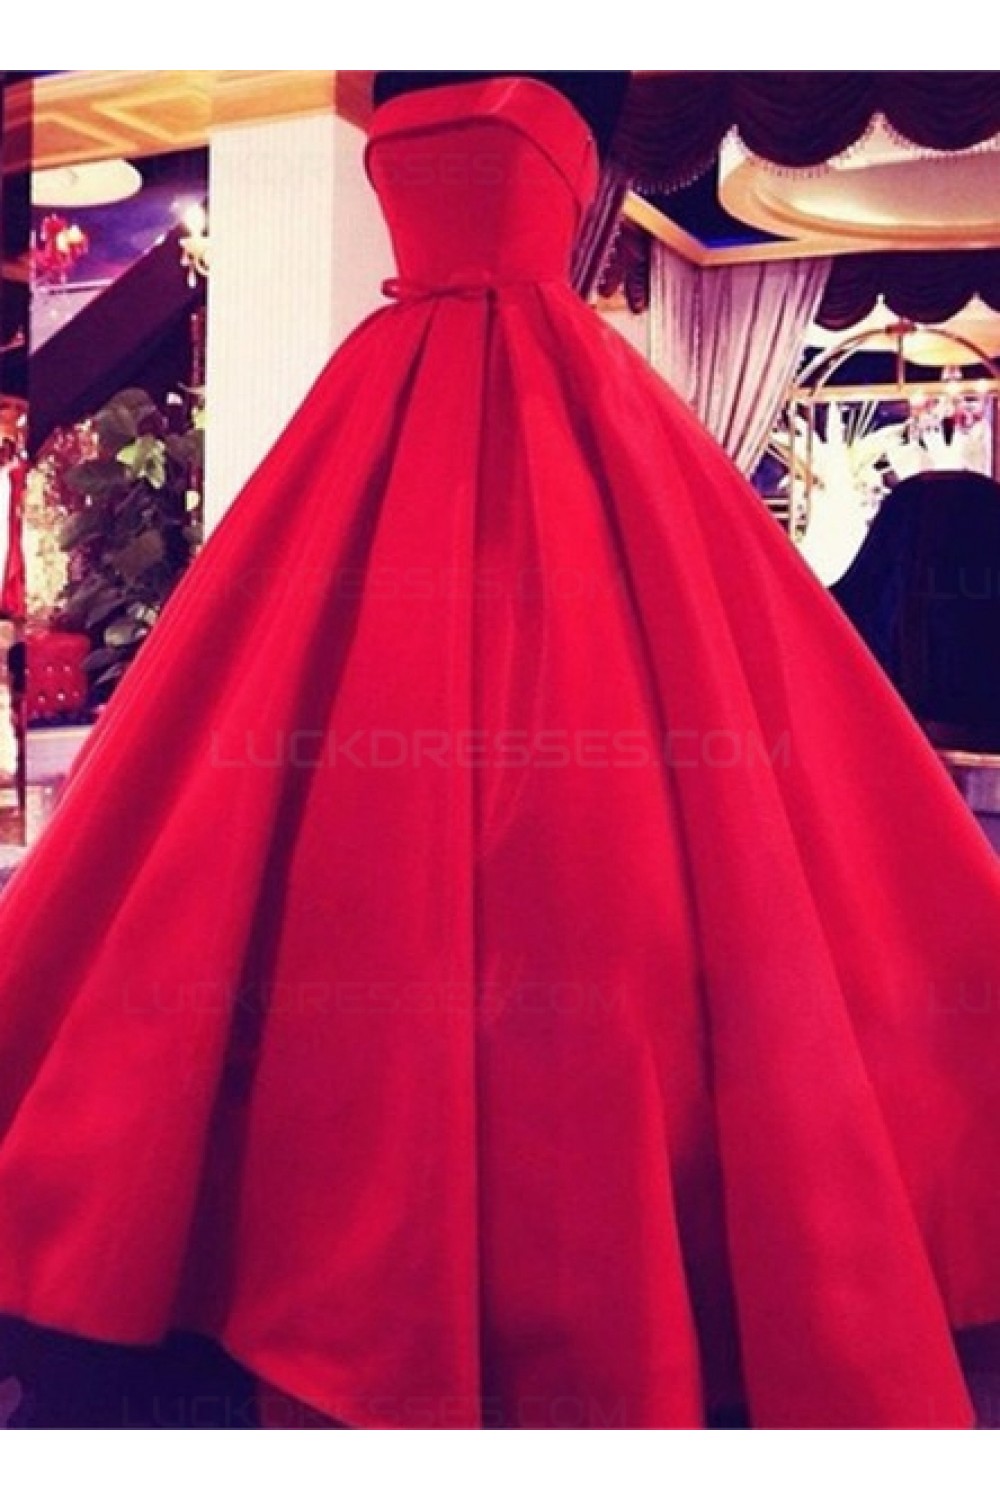 strapless red ball gown